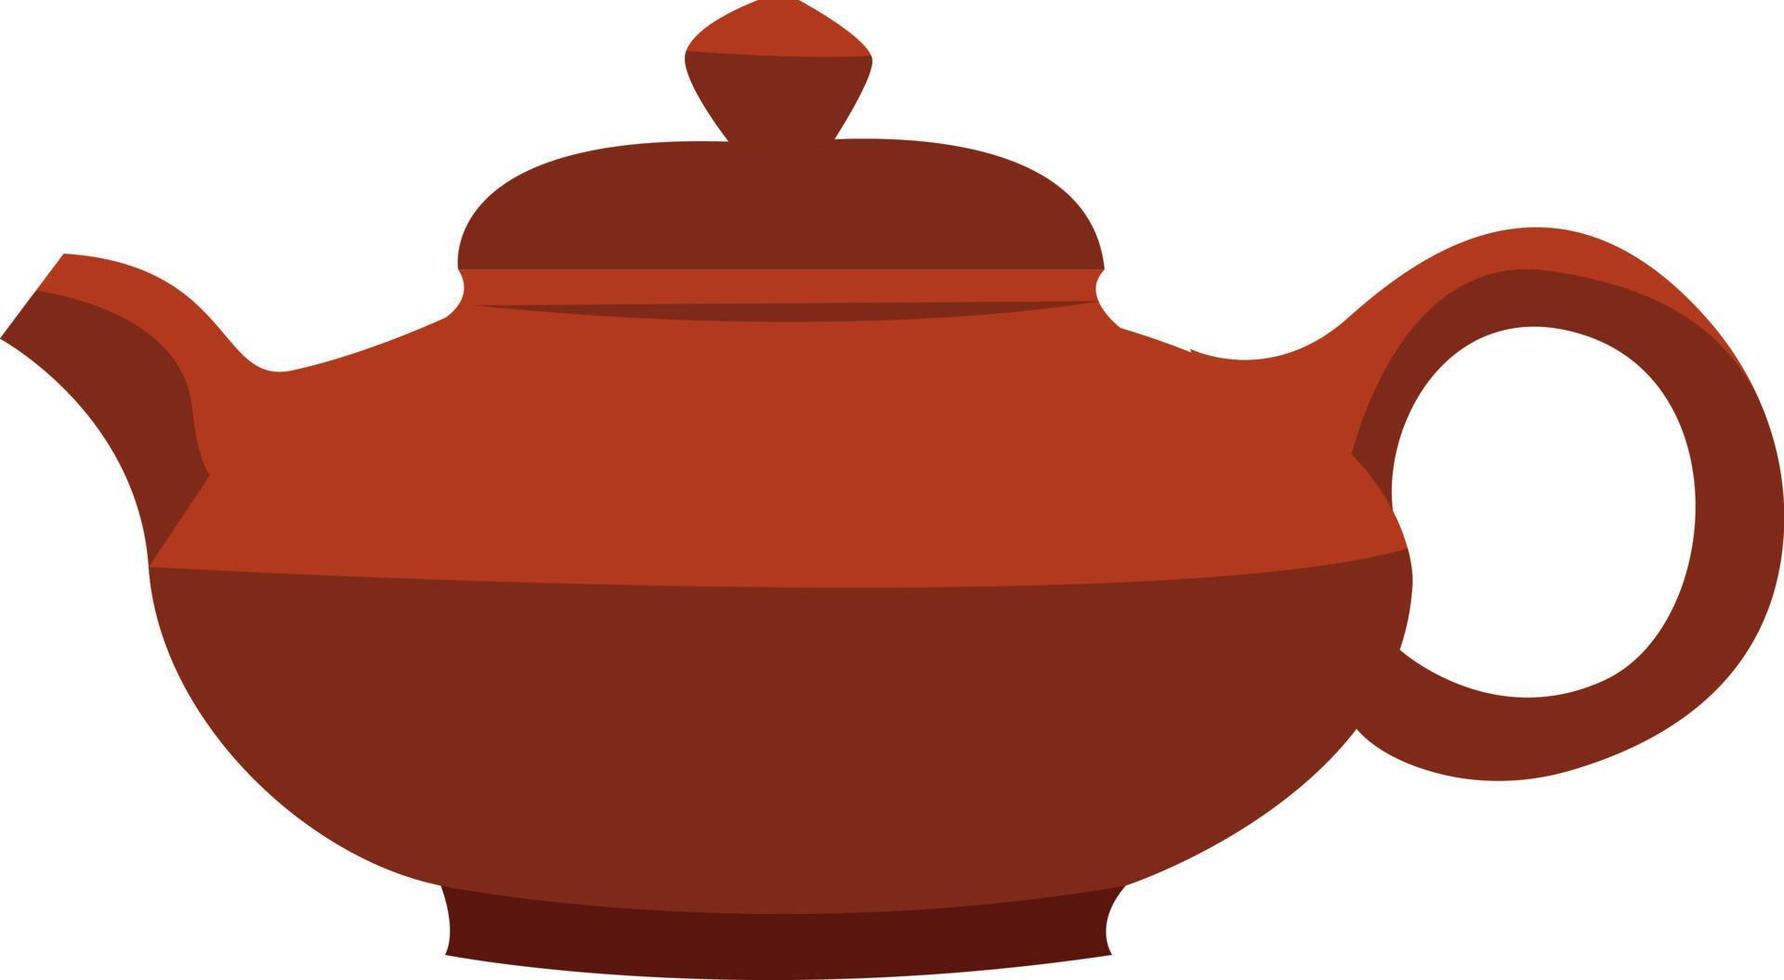 Red chinese teapot, illustration, vector on white background.